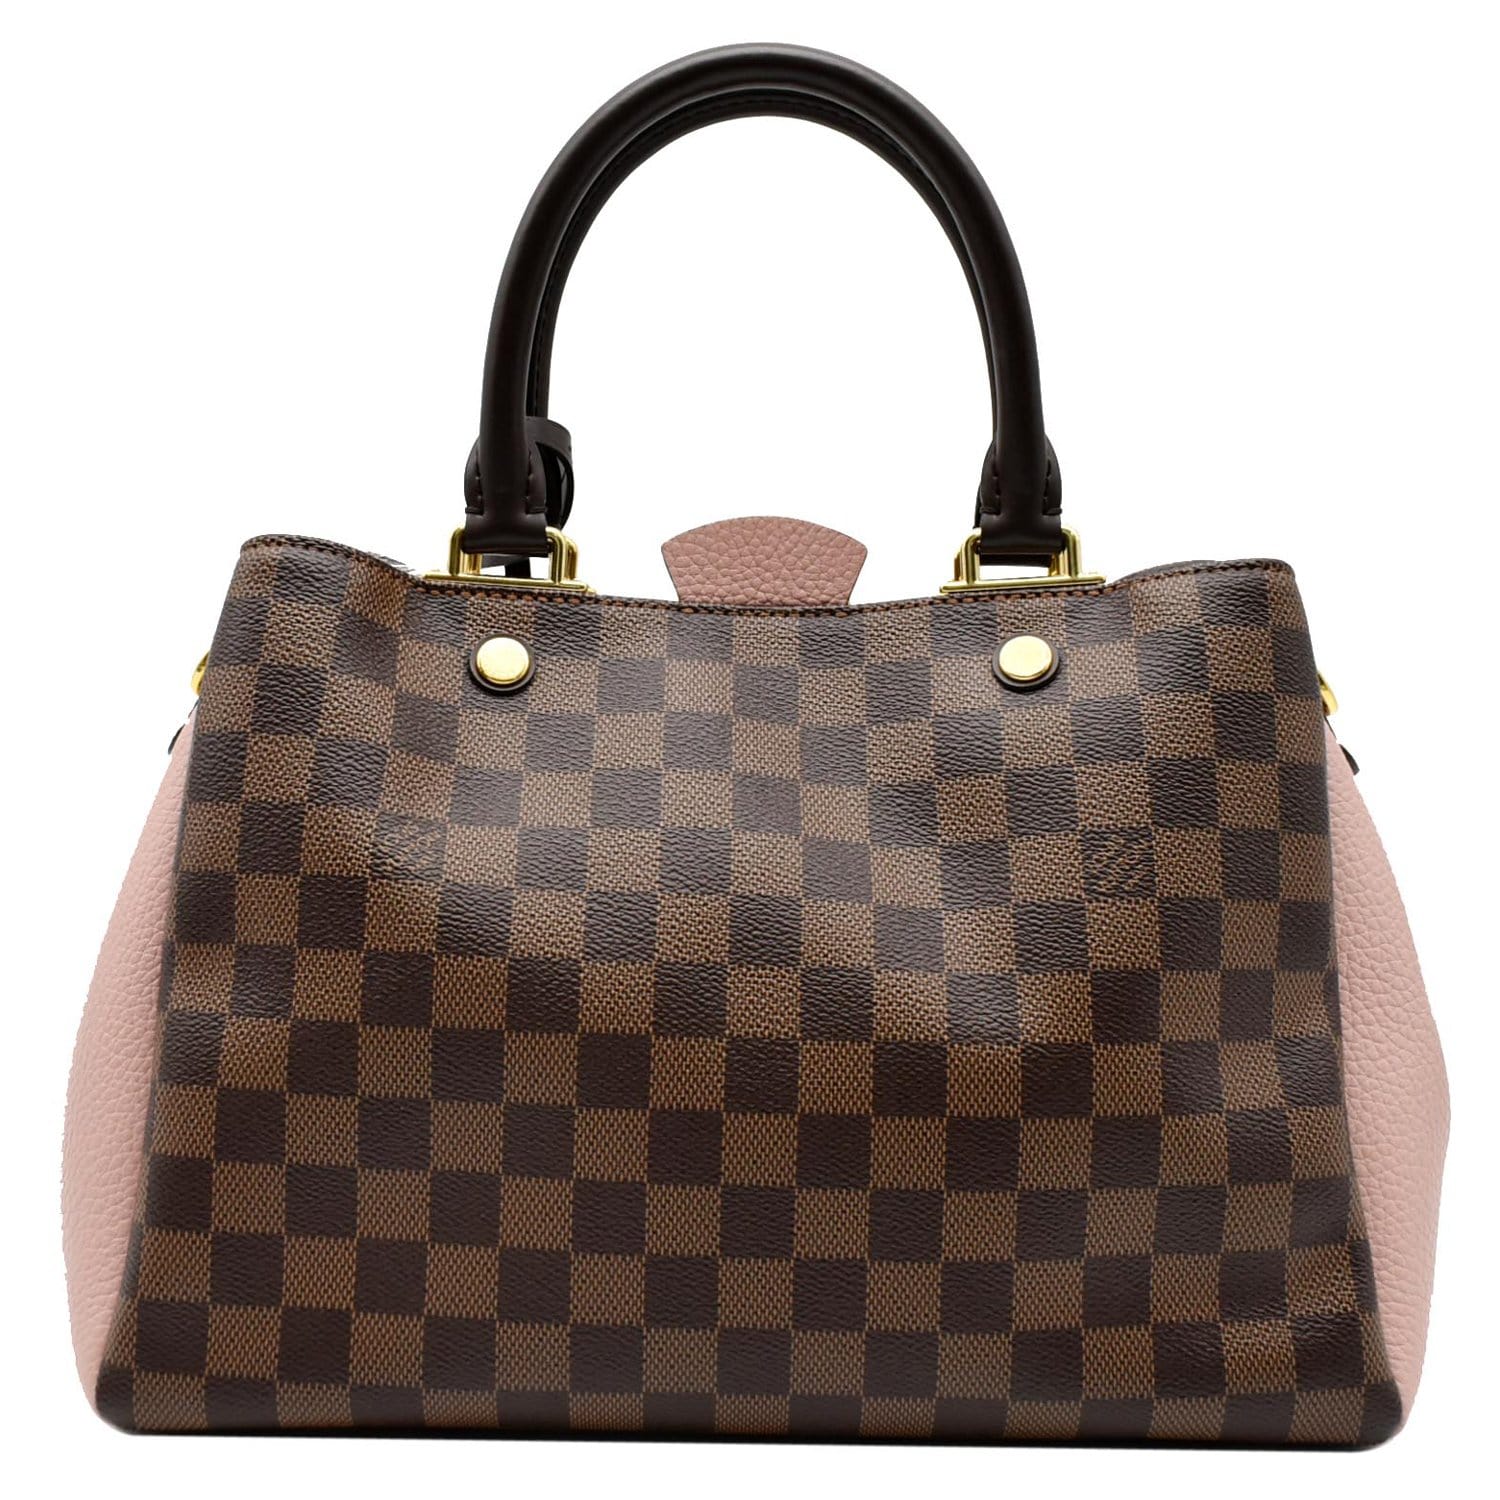 The Louis Vuitton Bag to Buy Right Now